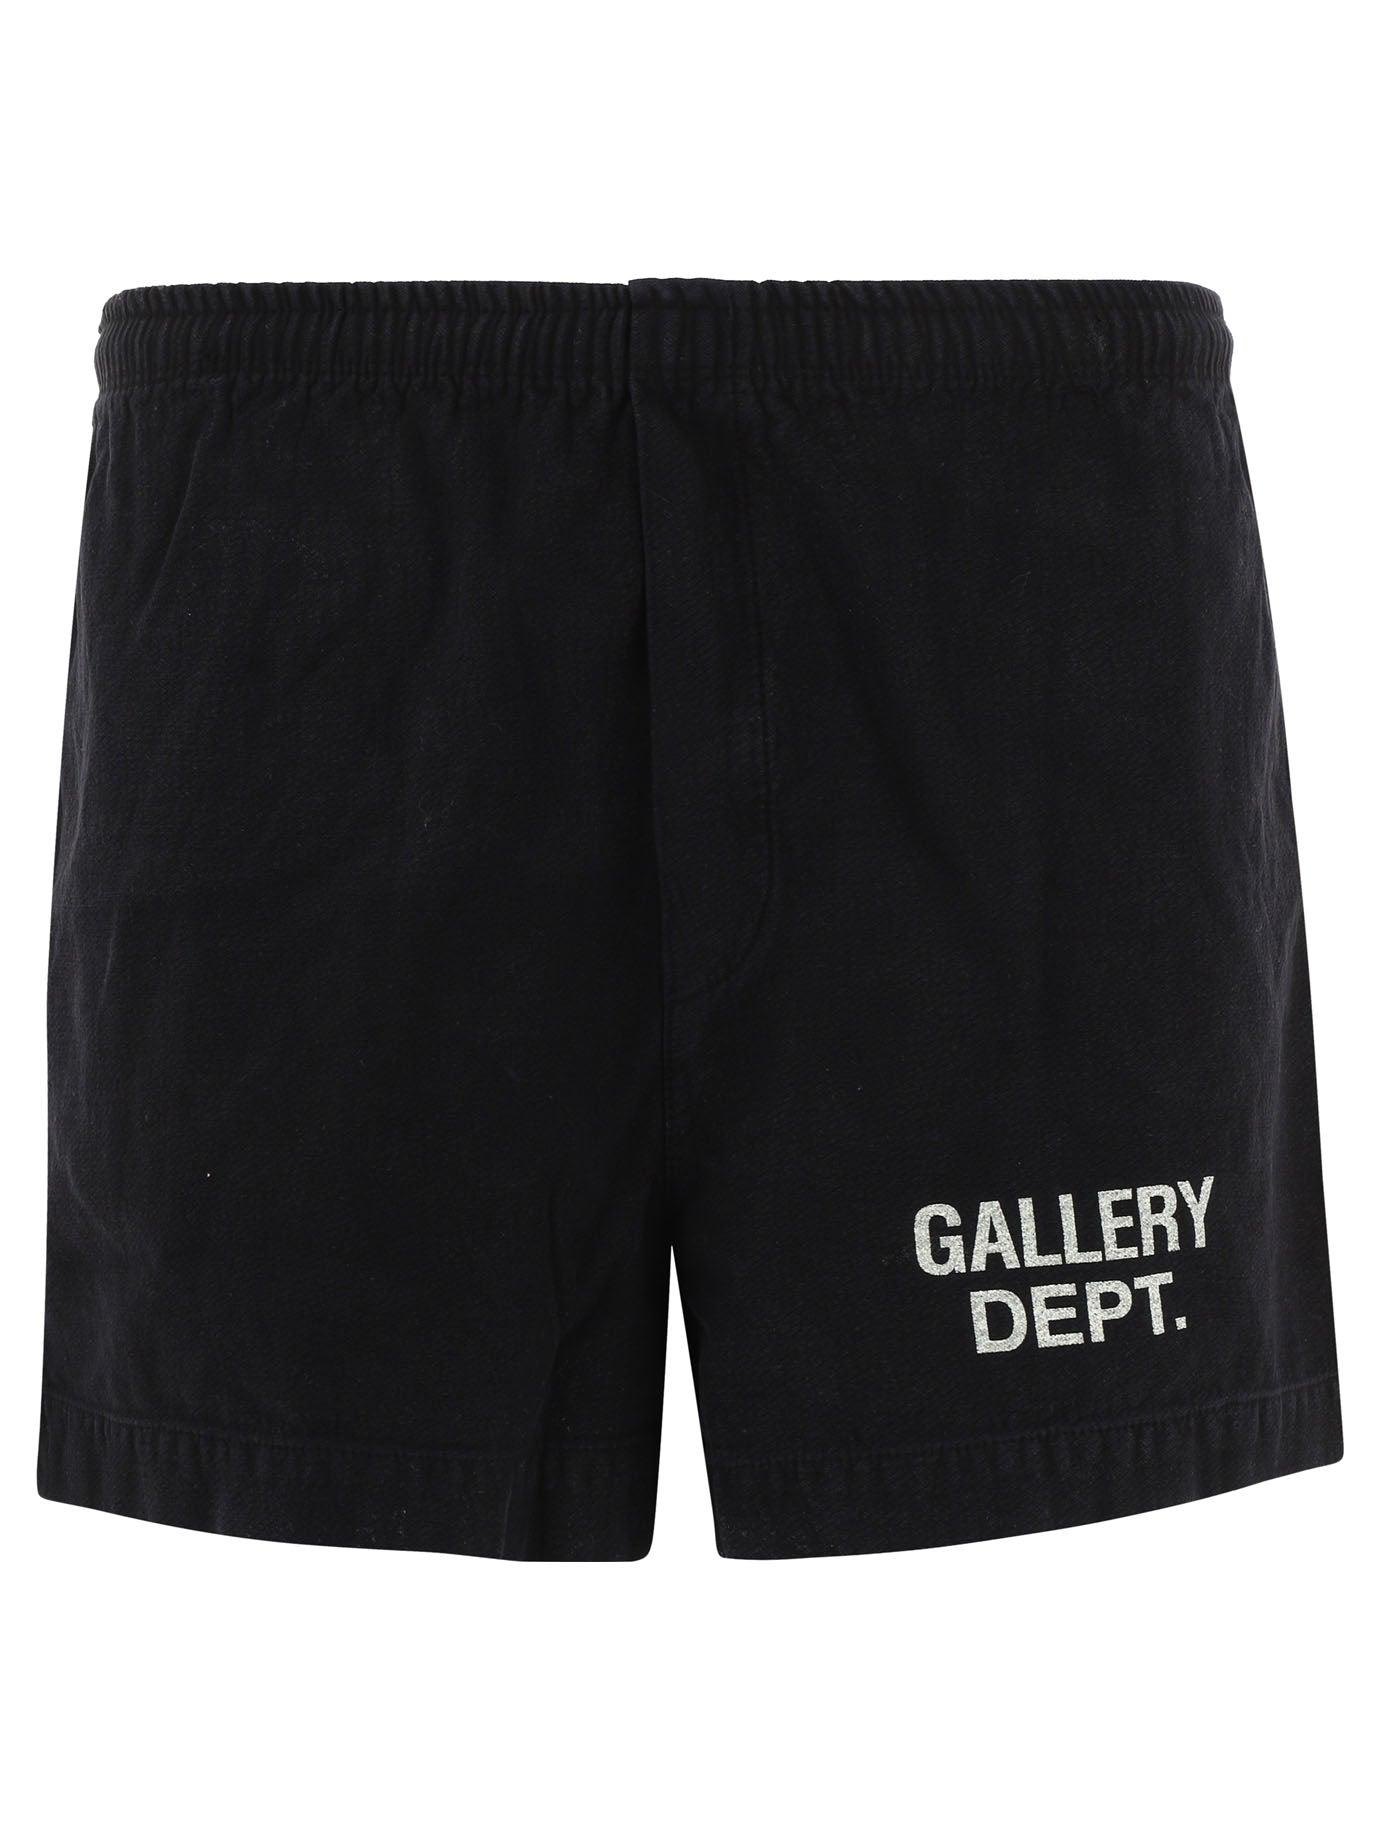 GALLERY DEPT. Short With Print in Black for Men | Lyst